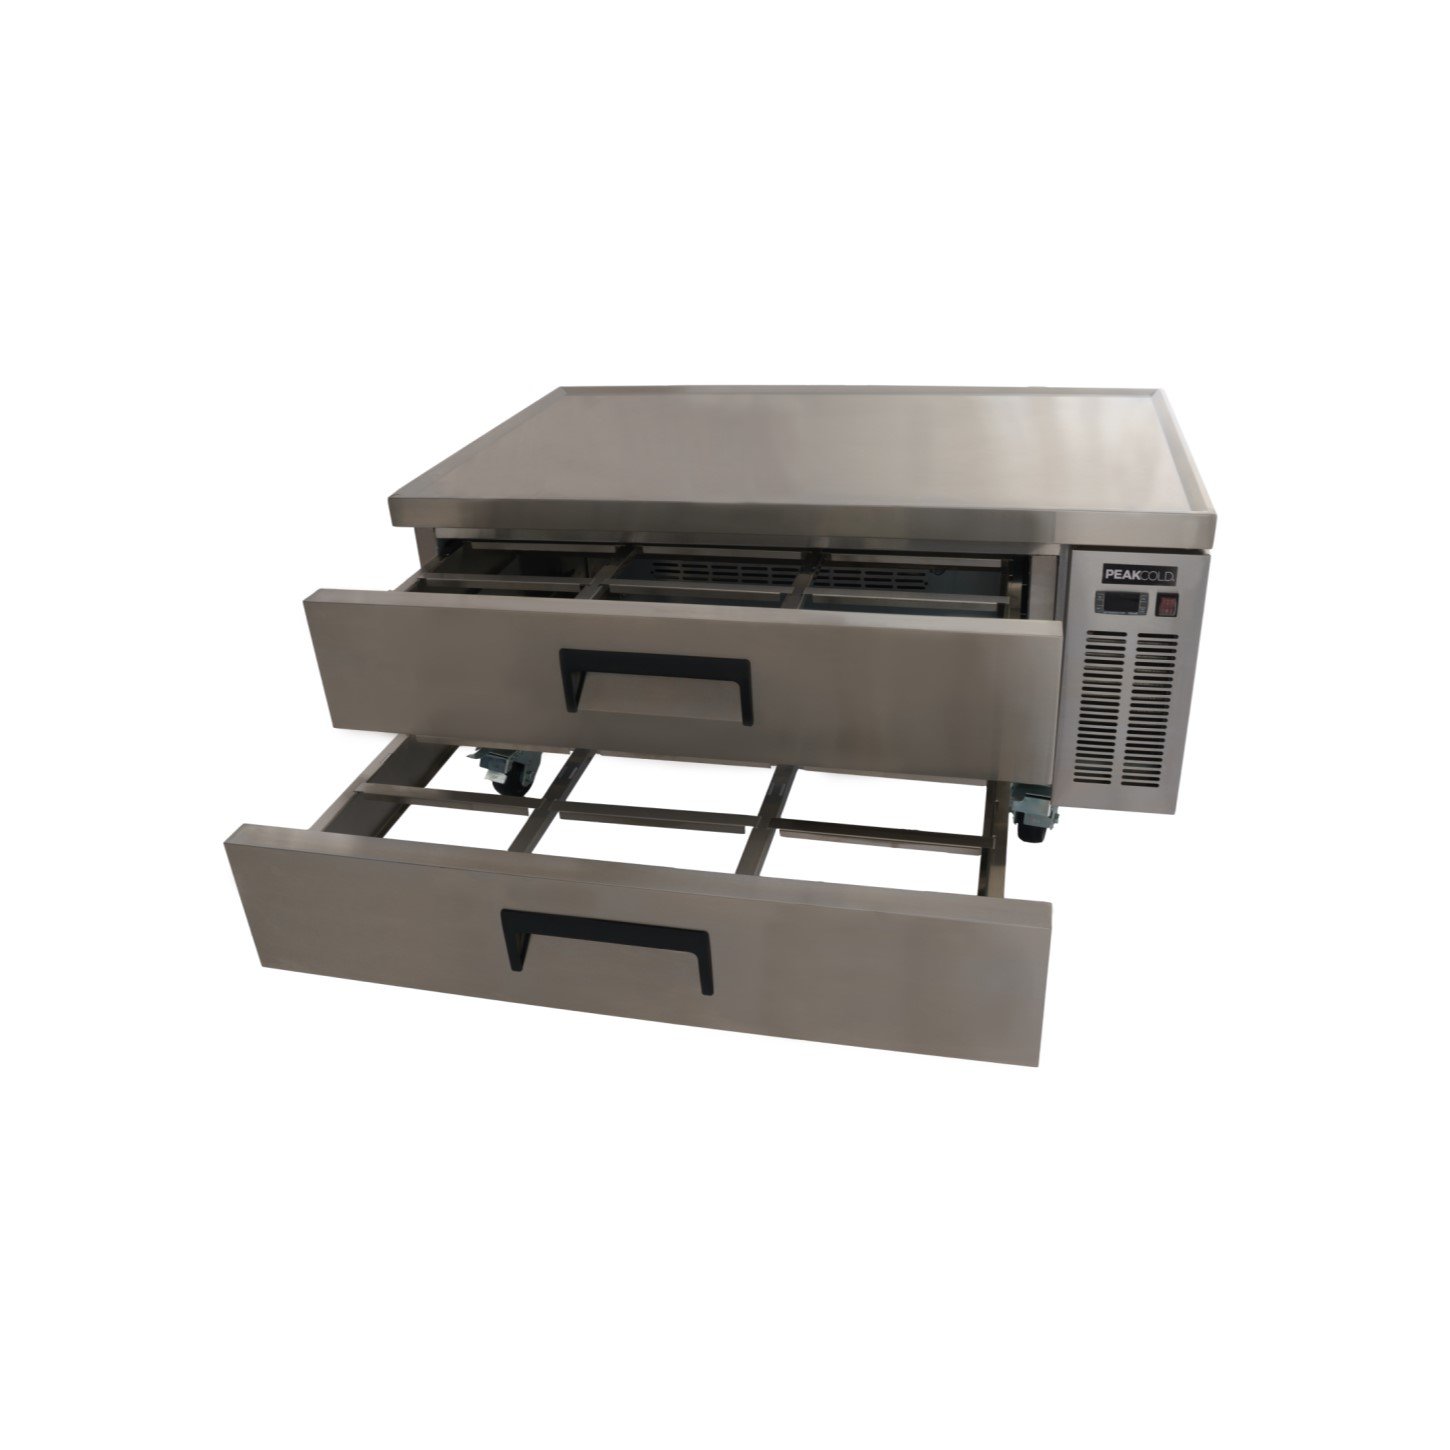 PeakCold 2-Drawer Refrigerated Chef Base - 52"